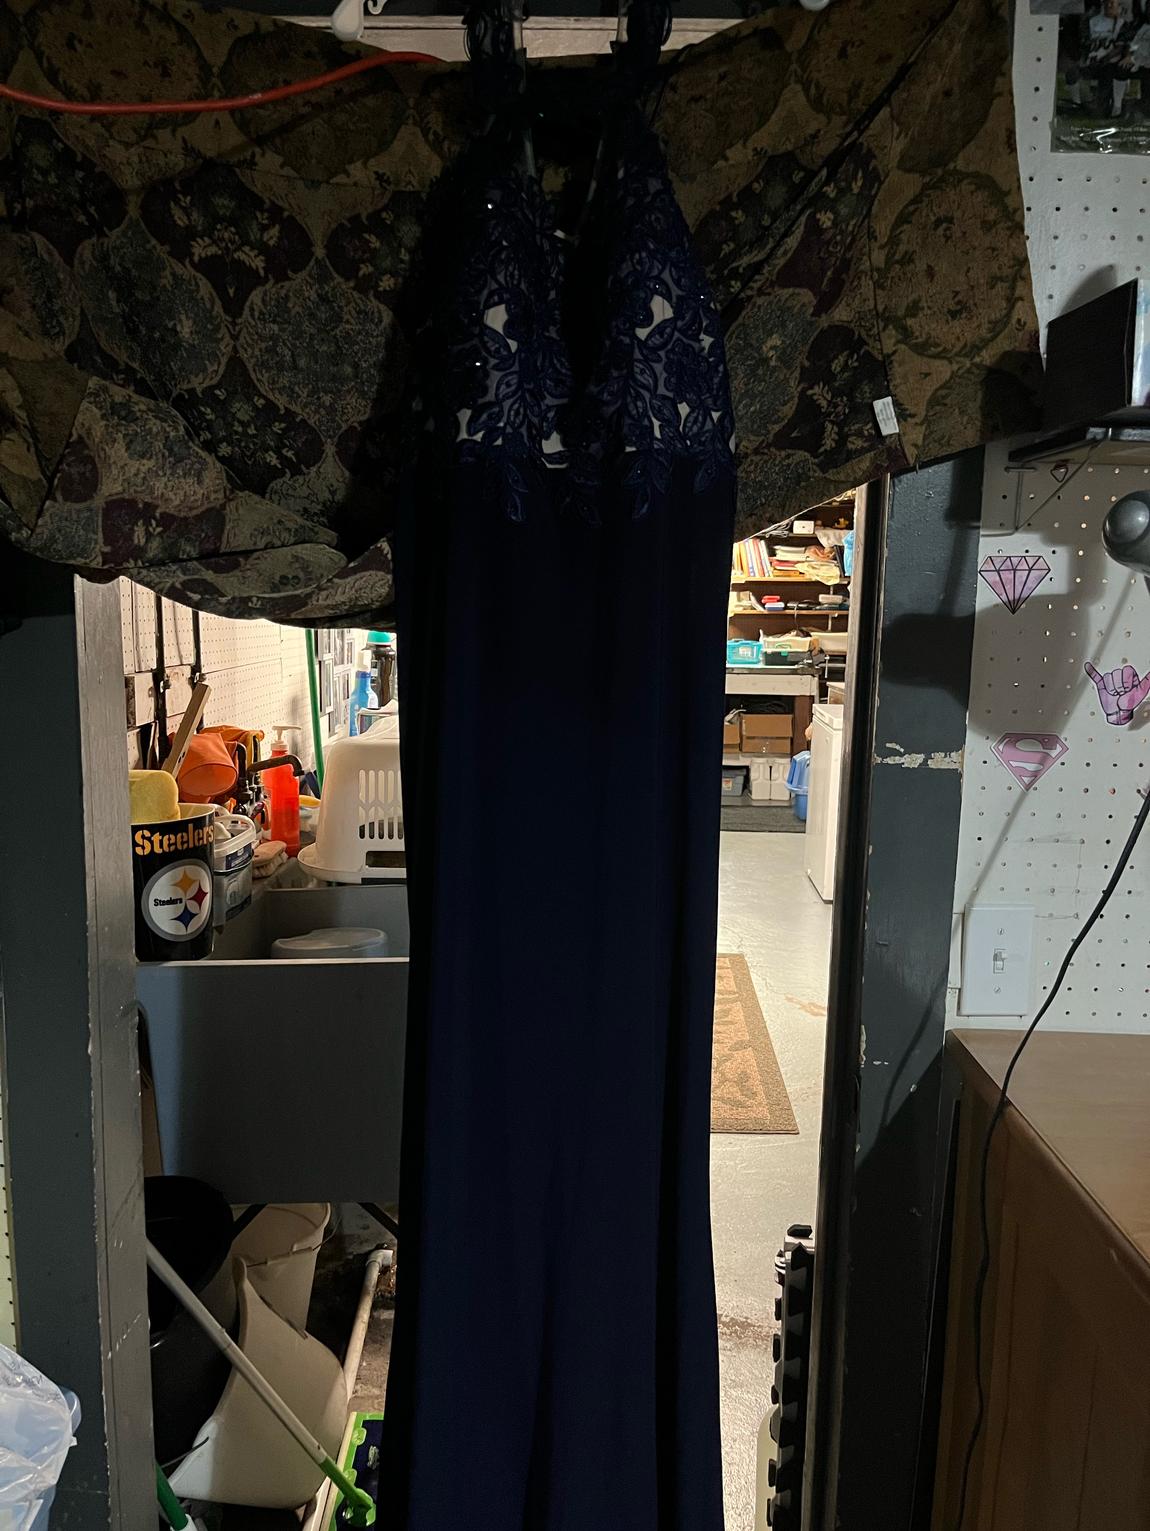 Size 14 Blue Floor Length Maxi on Queenly